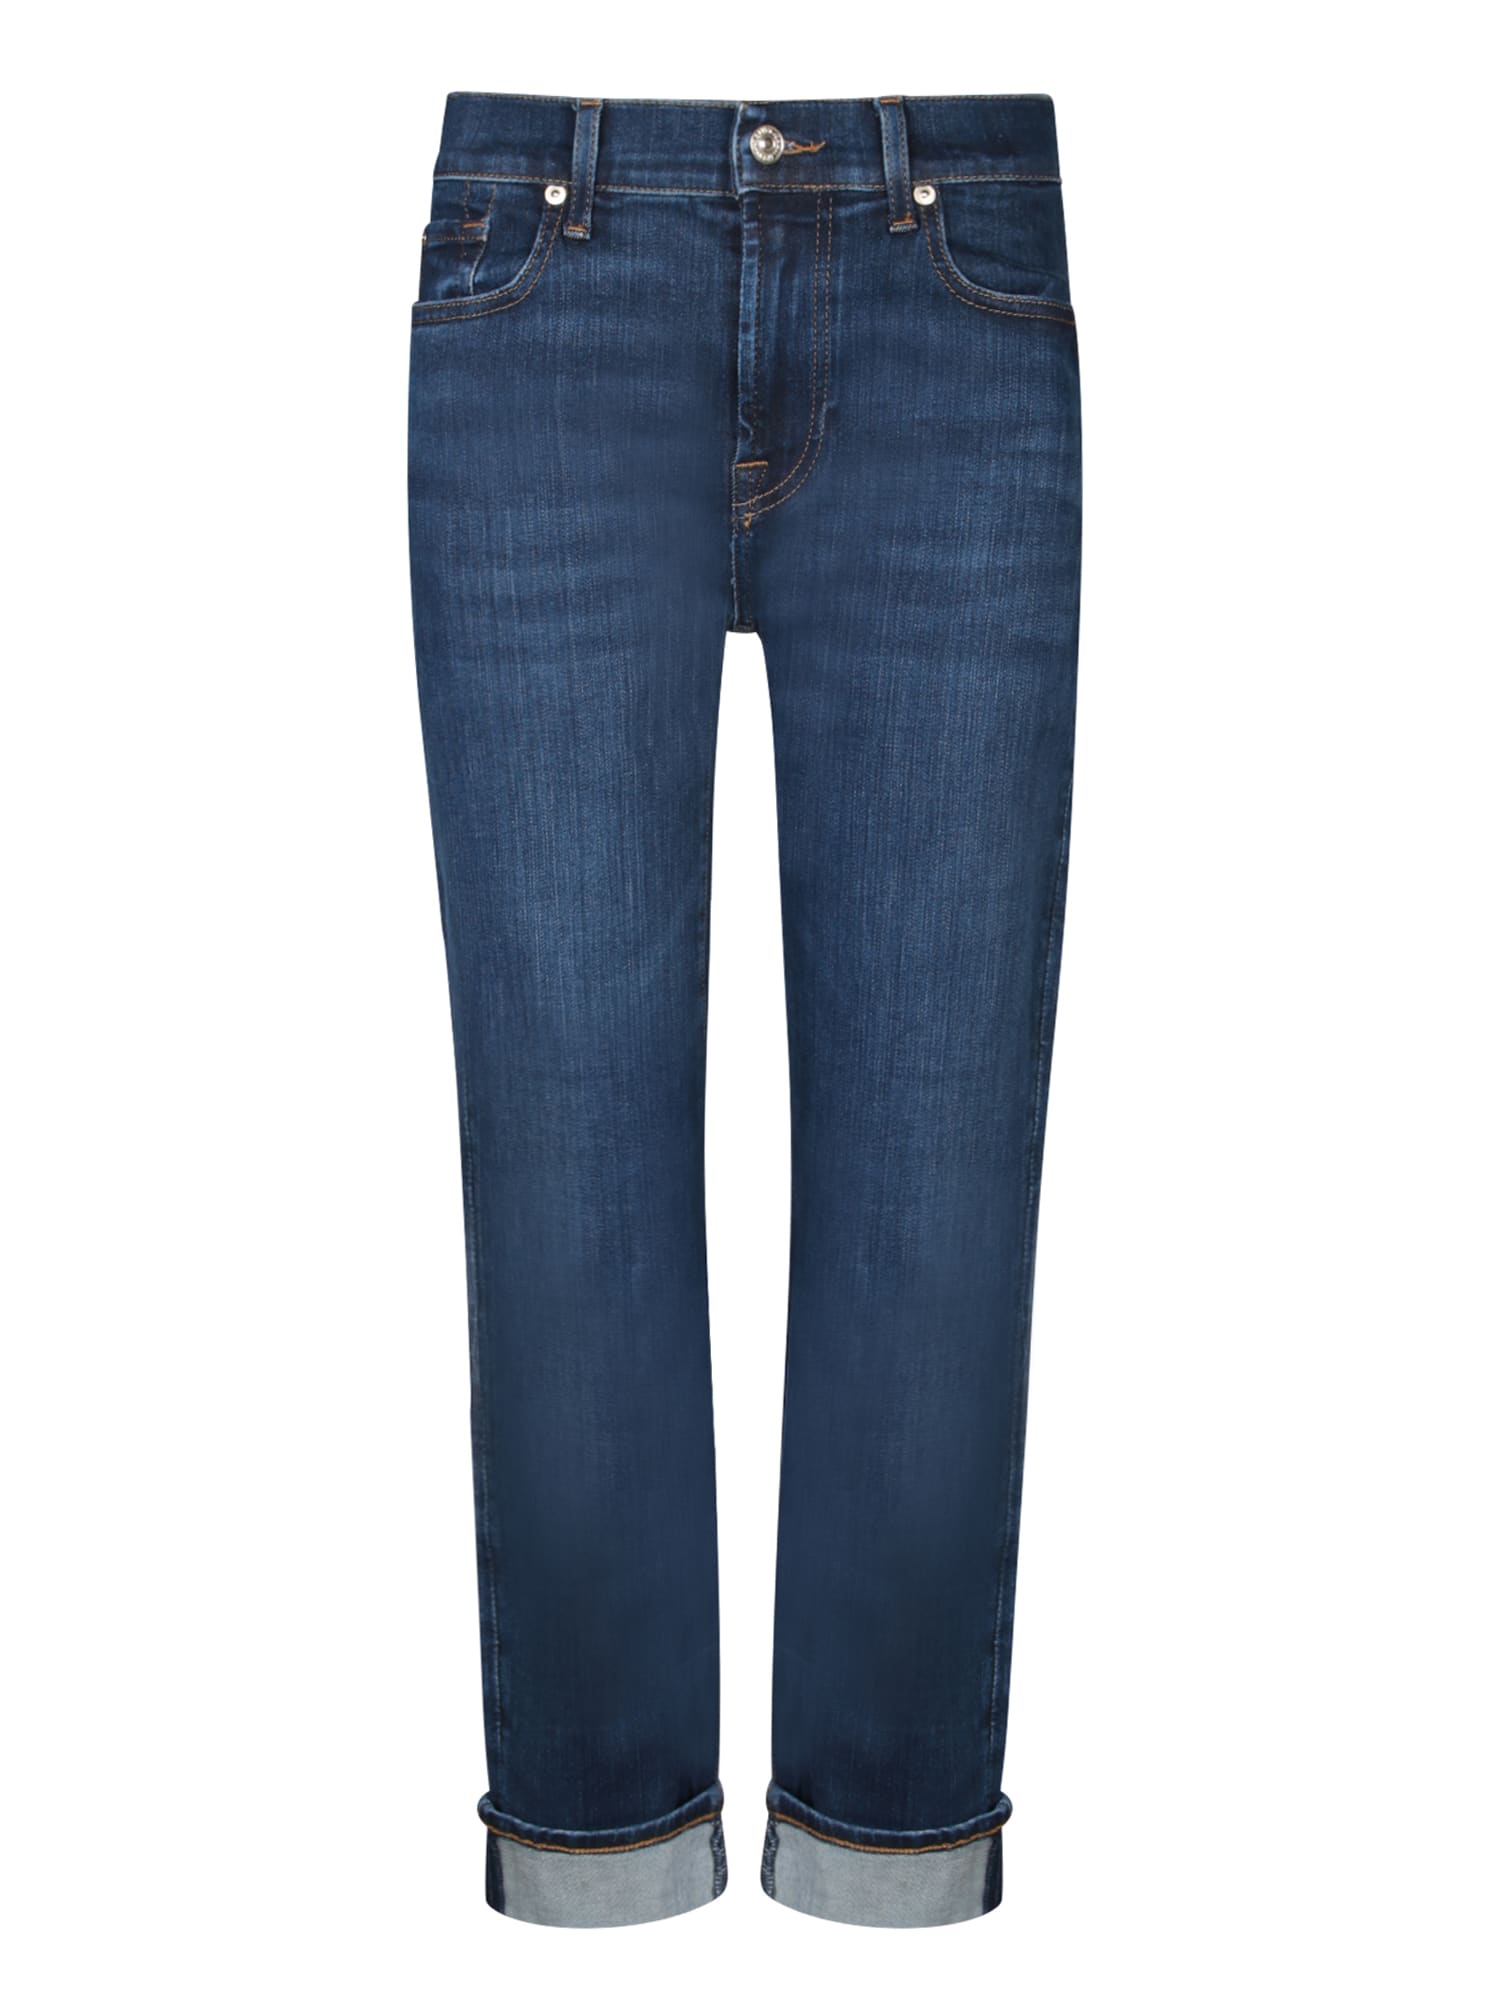 Shop 7 For All Mankind Relaxed Skinny Blue Jeans